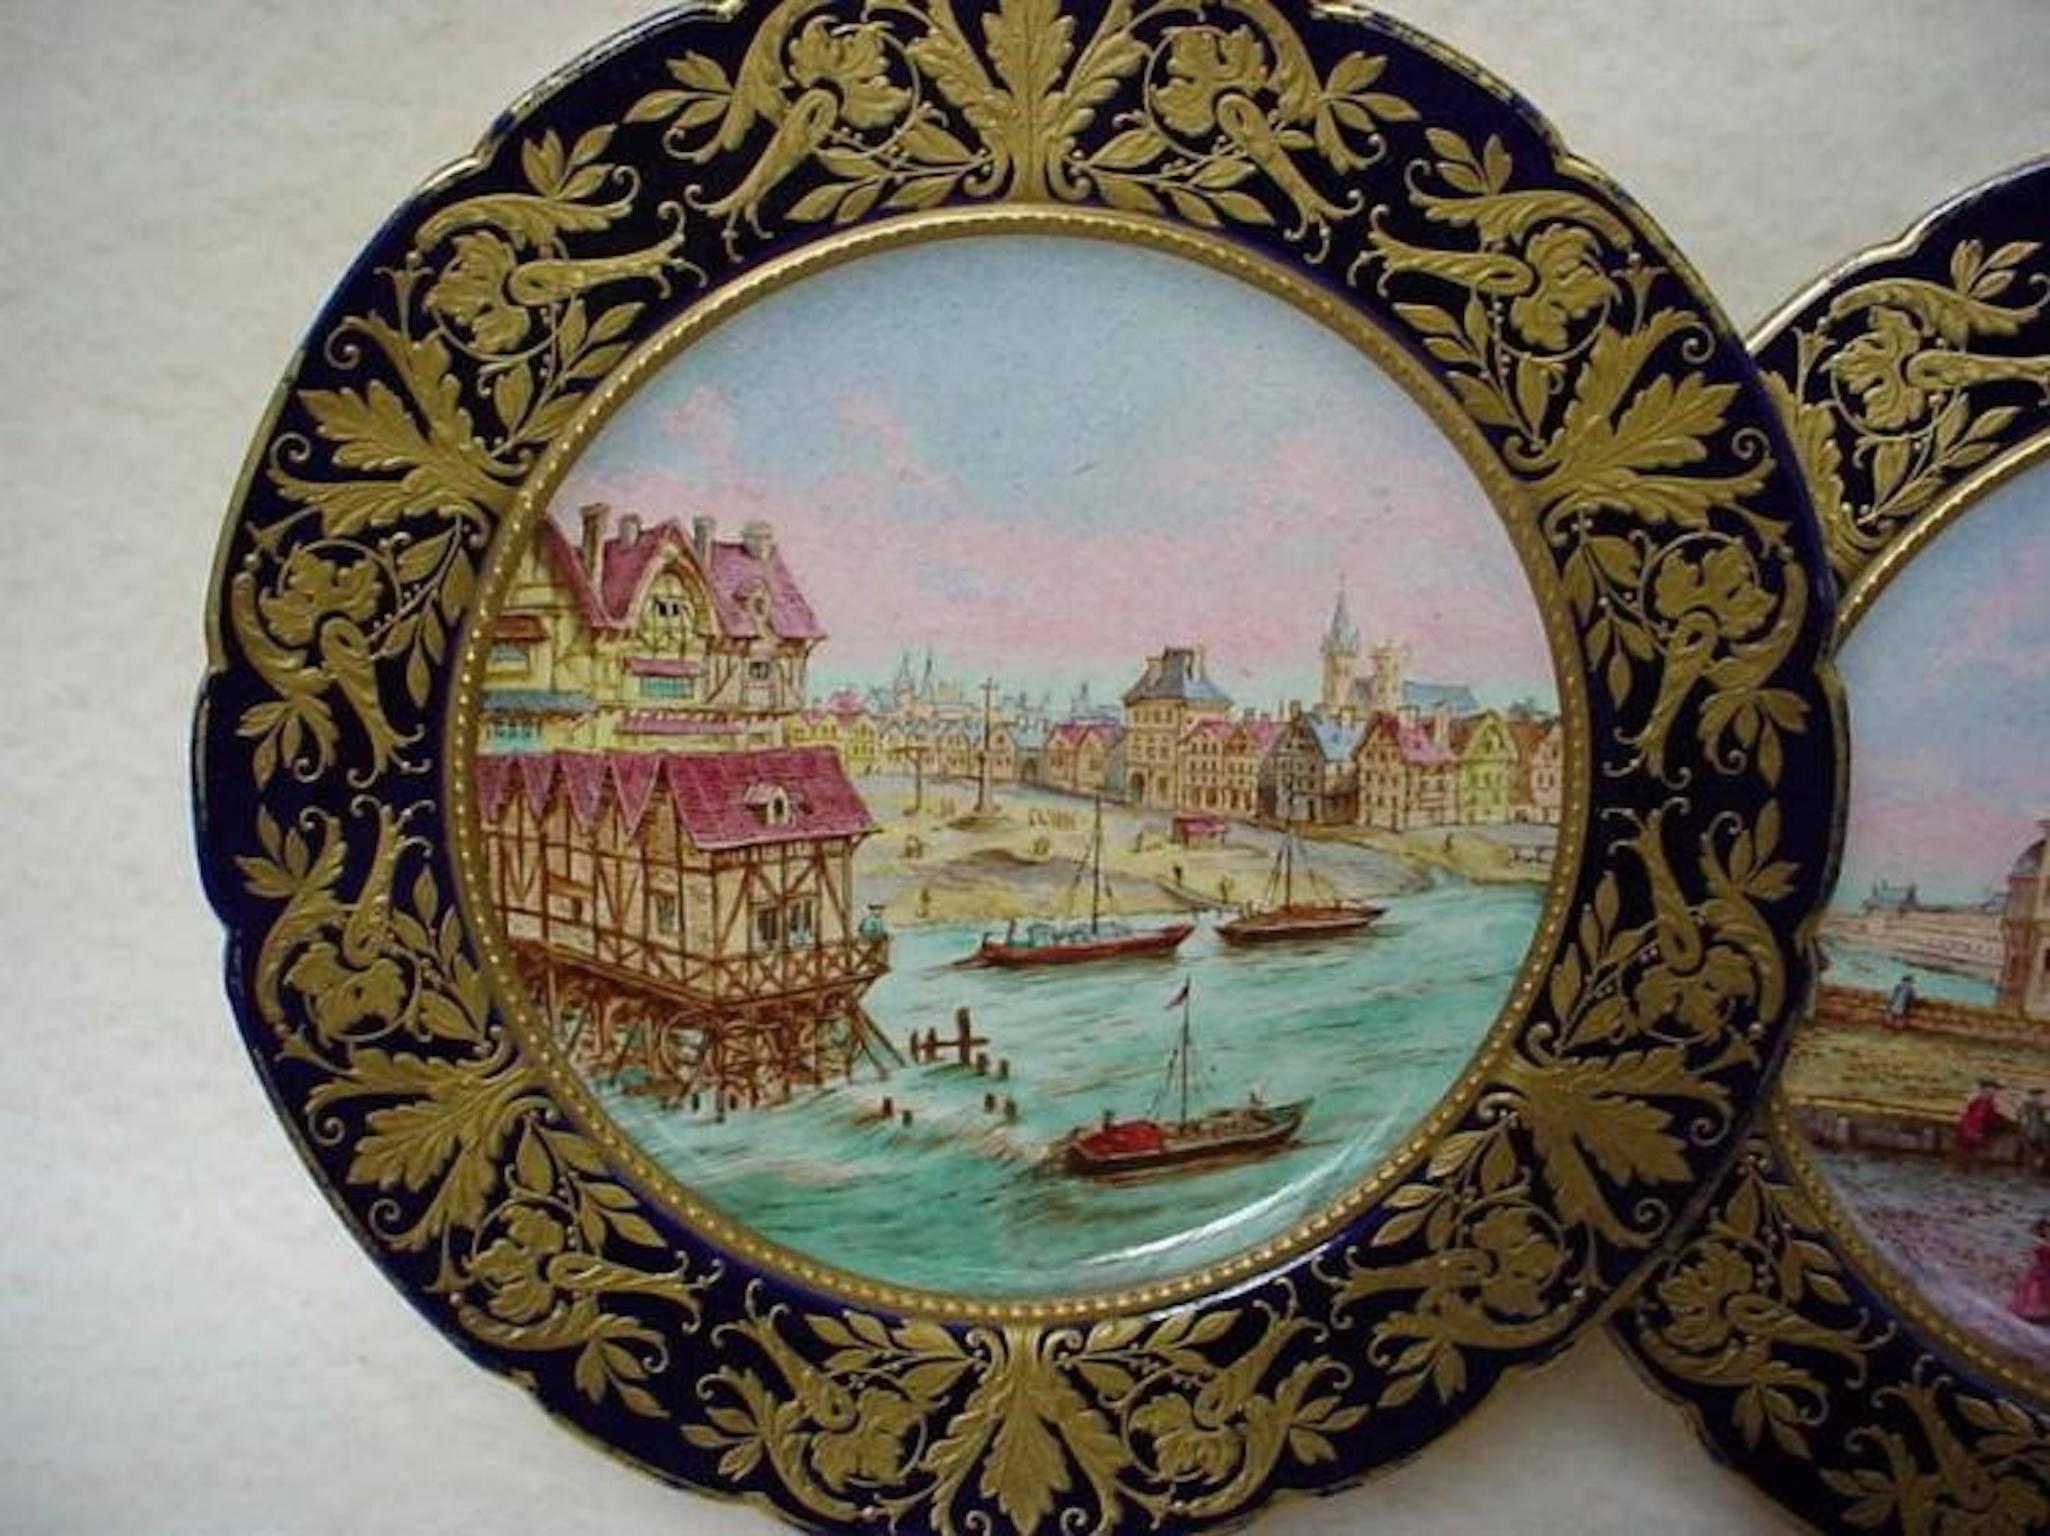 Two beautiful 18th century Sevres hand-painted plates depicting a scene from a city possibly Venice. Stamped with the Sevres mark on the back, signed by the artist Danielle, and signed "La Samaritaine" above the Sevres mark on the back.